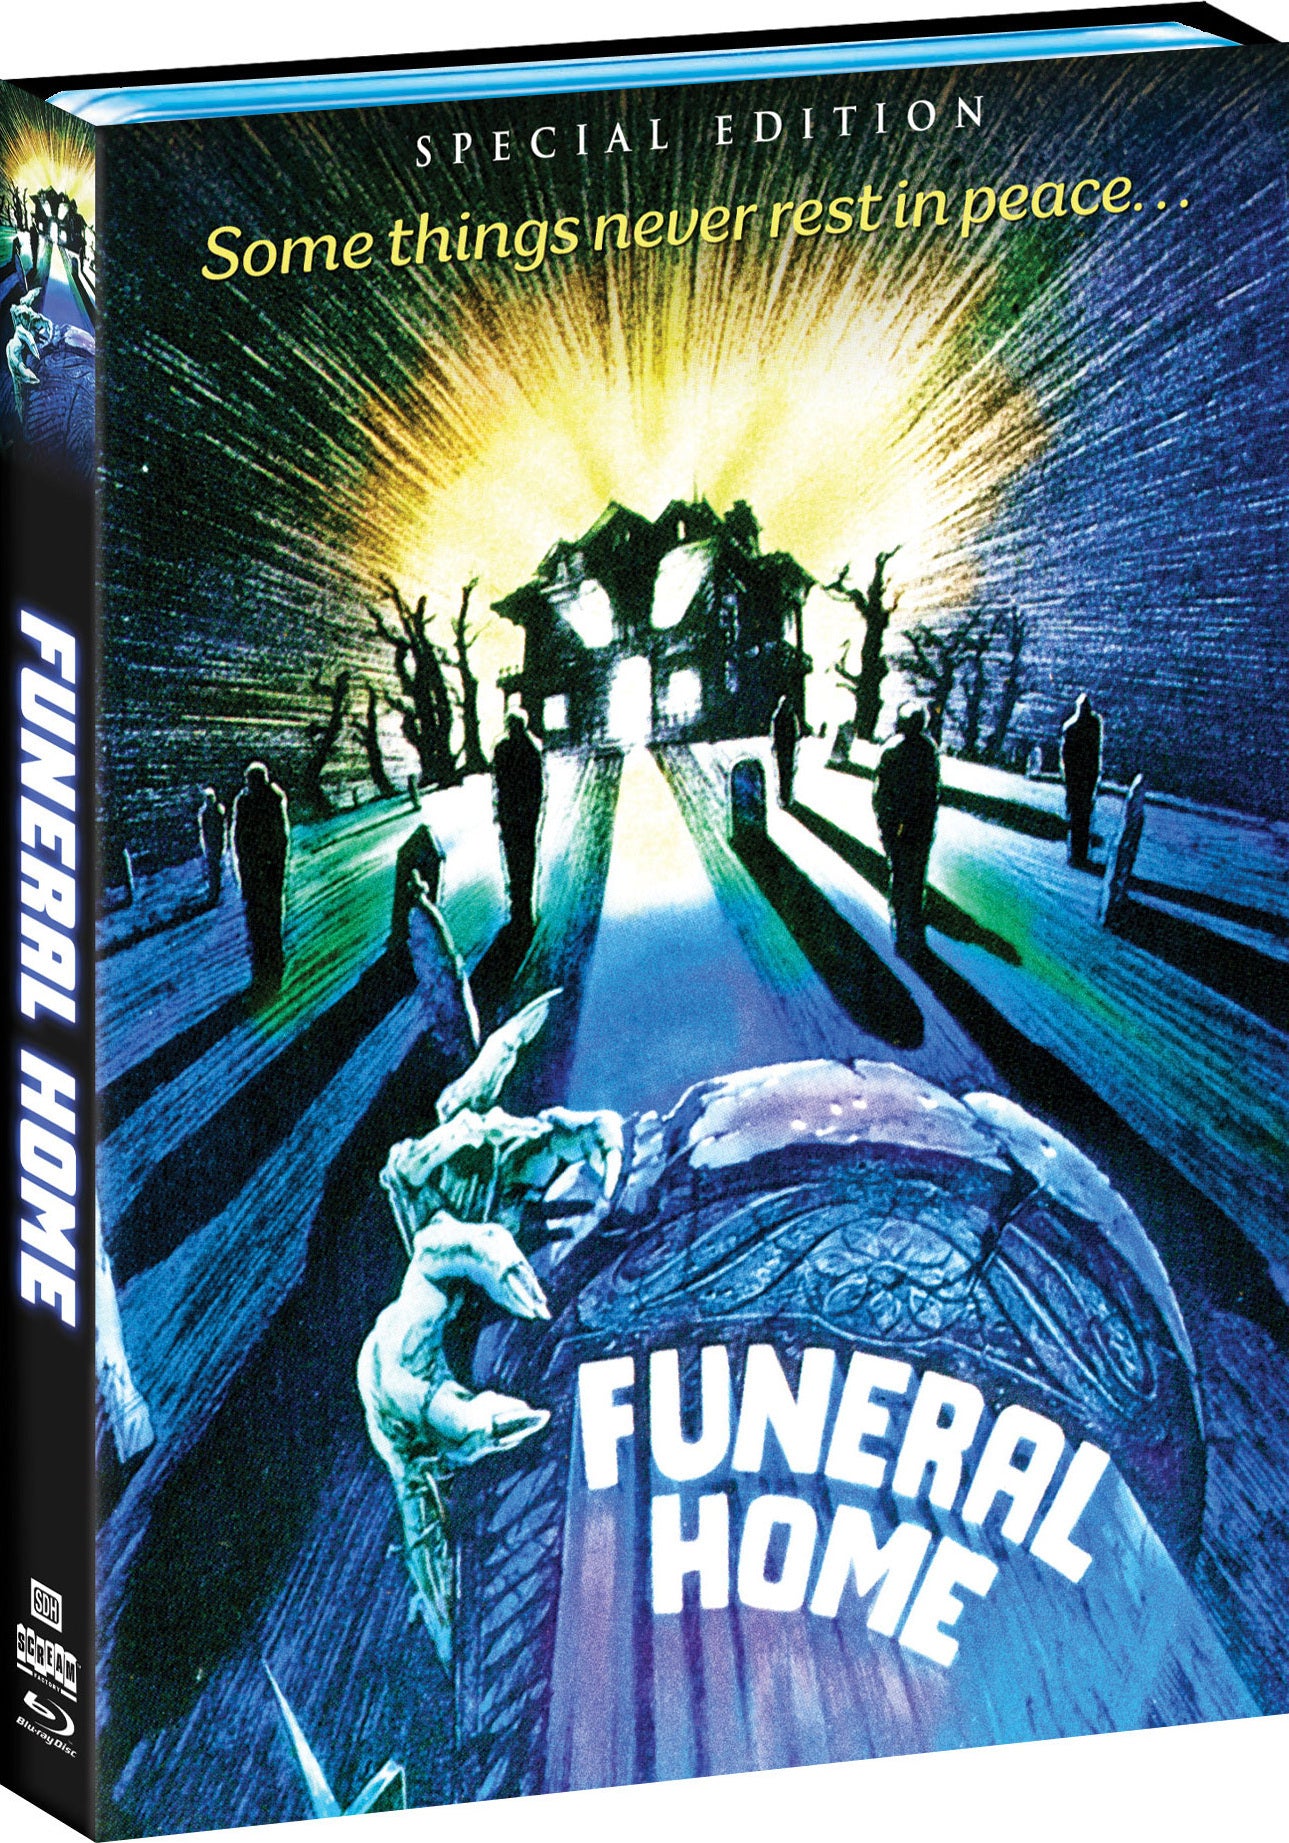 Funeral Home: Special Edition